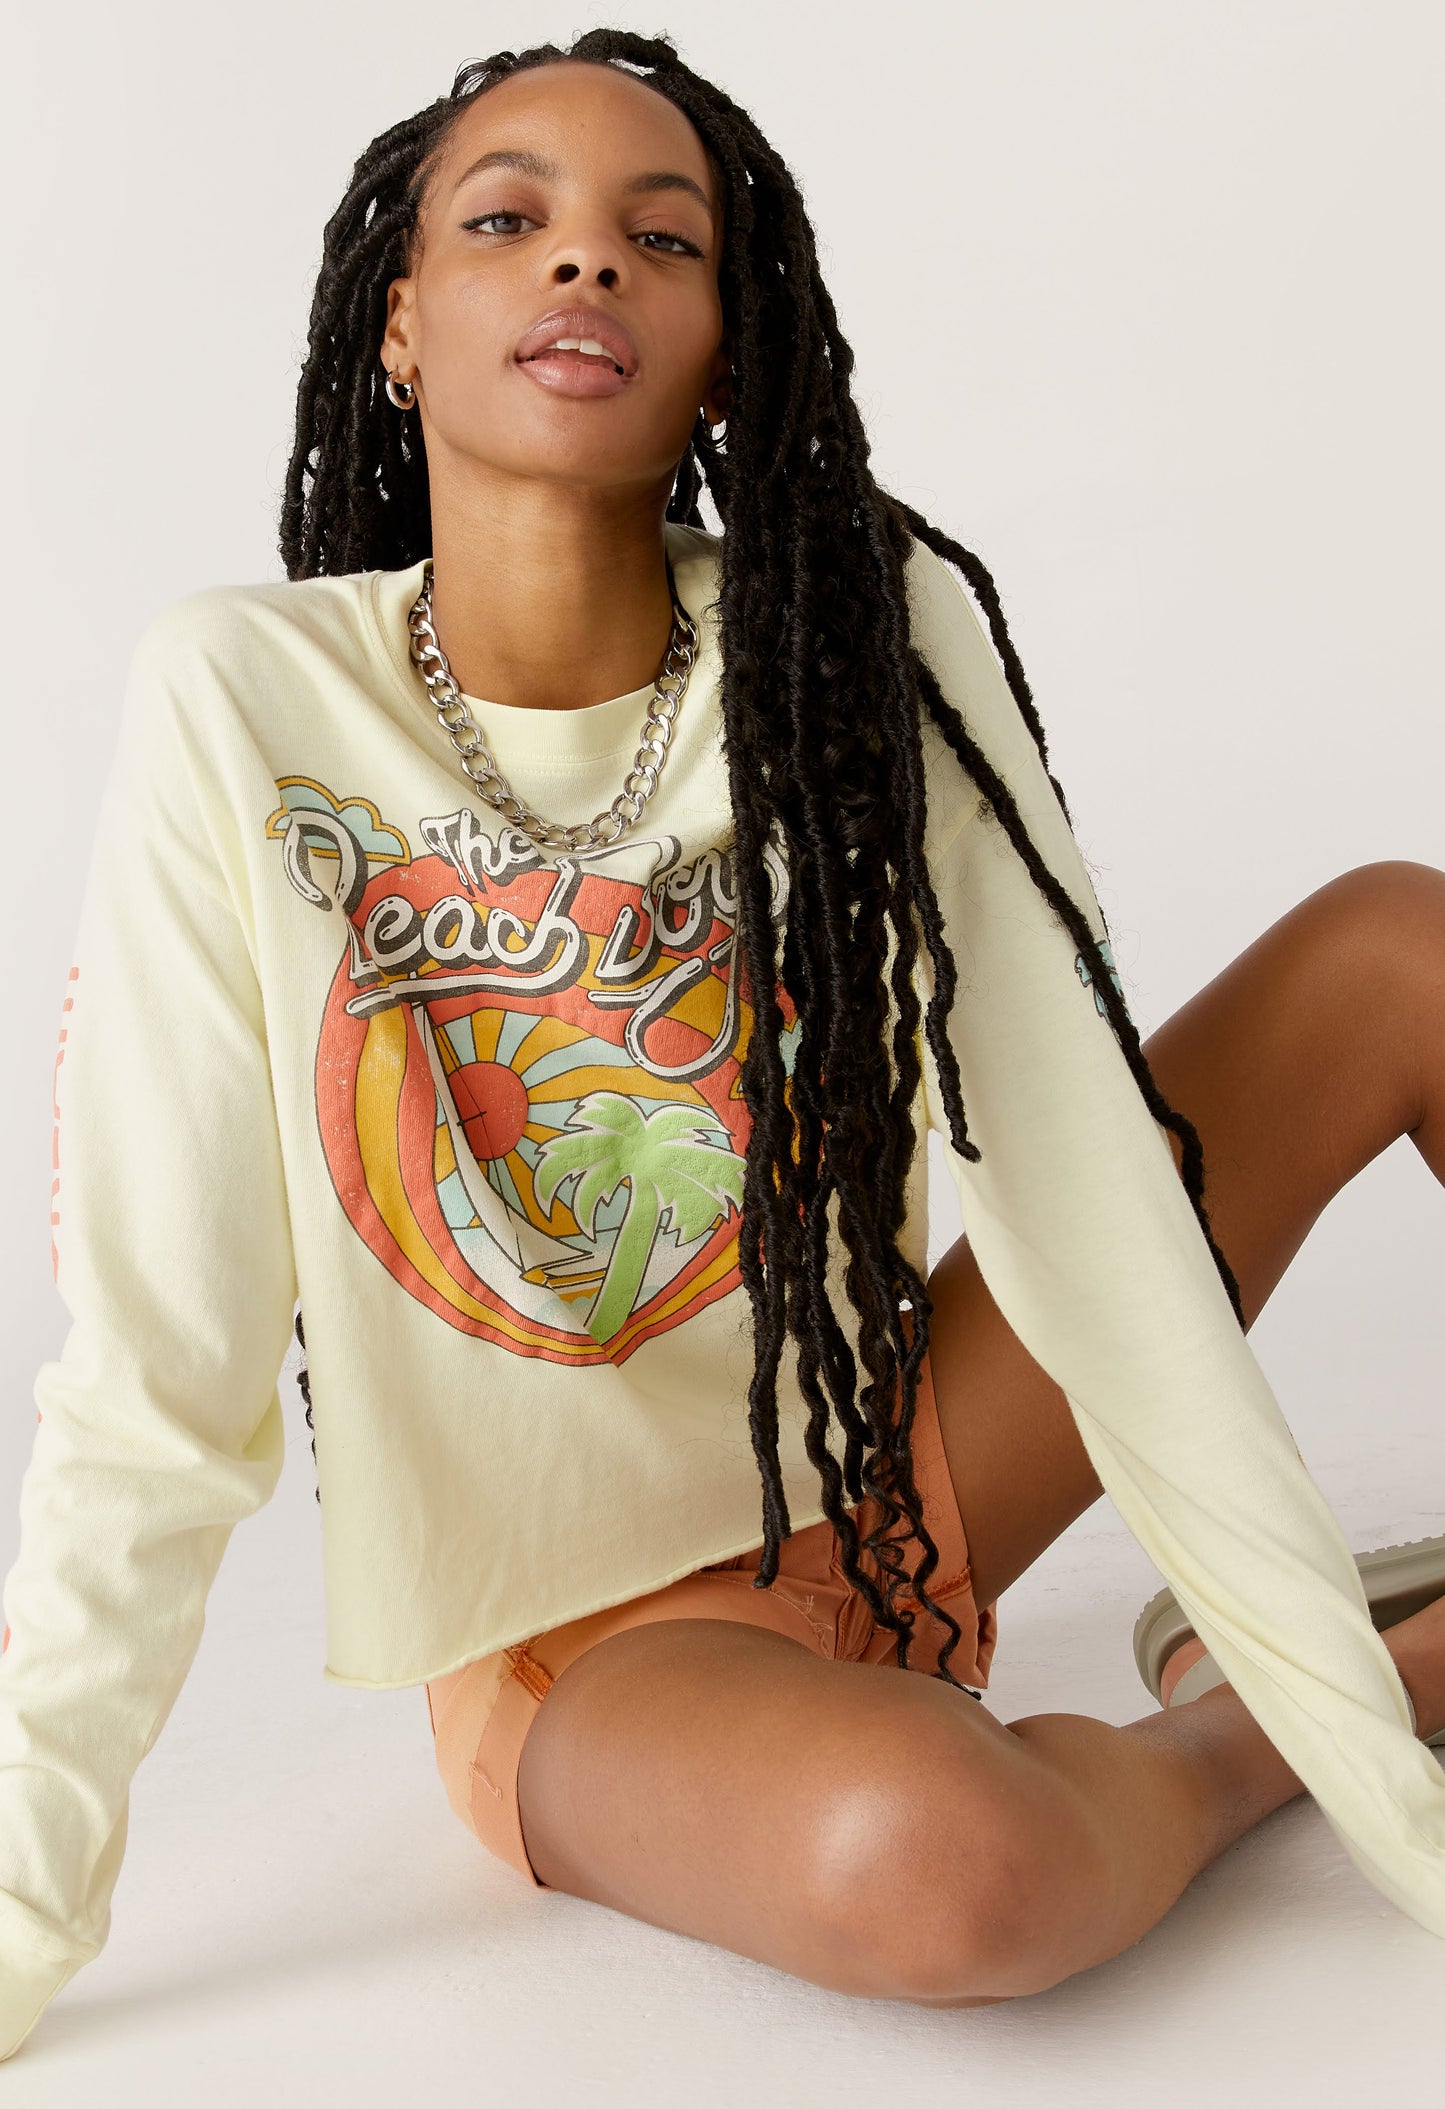 A dark curly haired model featuring a white long sleeve crop designed with the group’s name, iconic summertime font and graphics. 